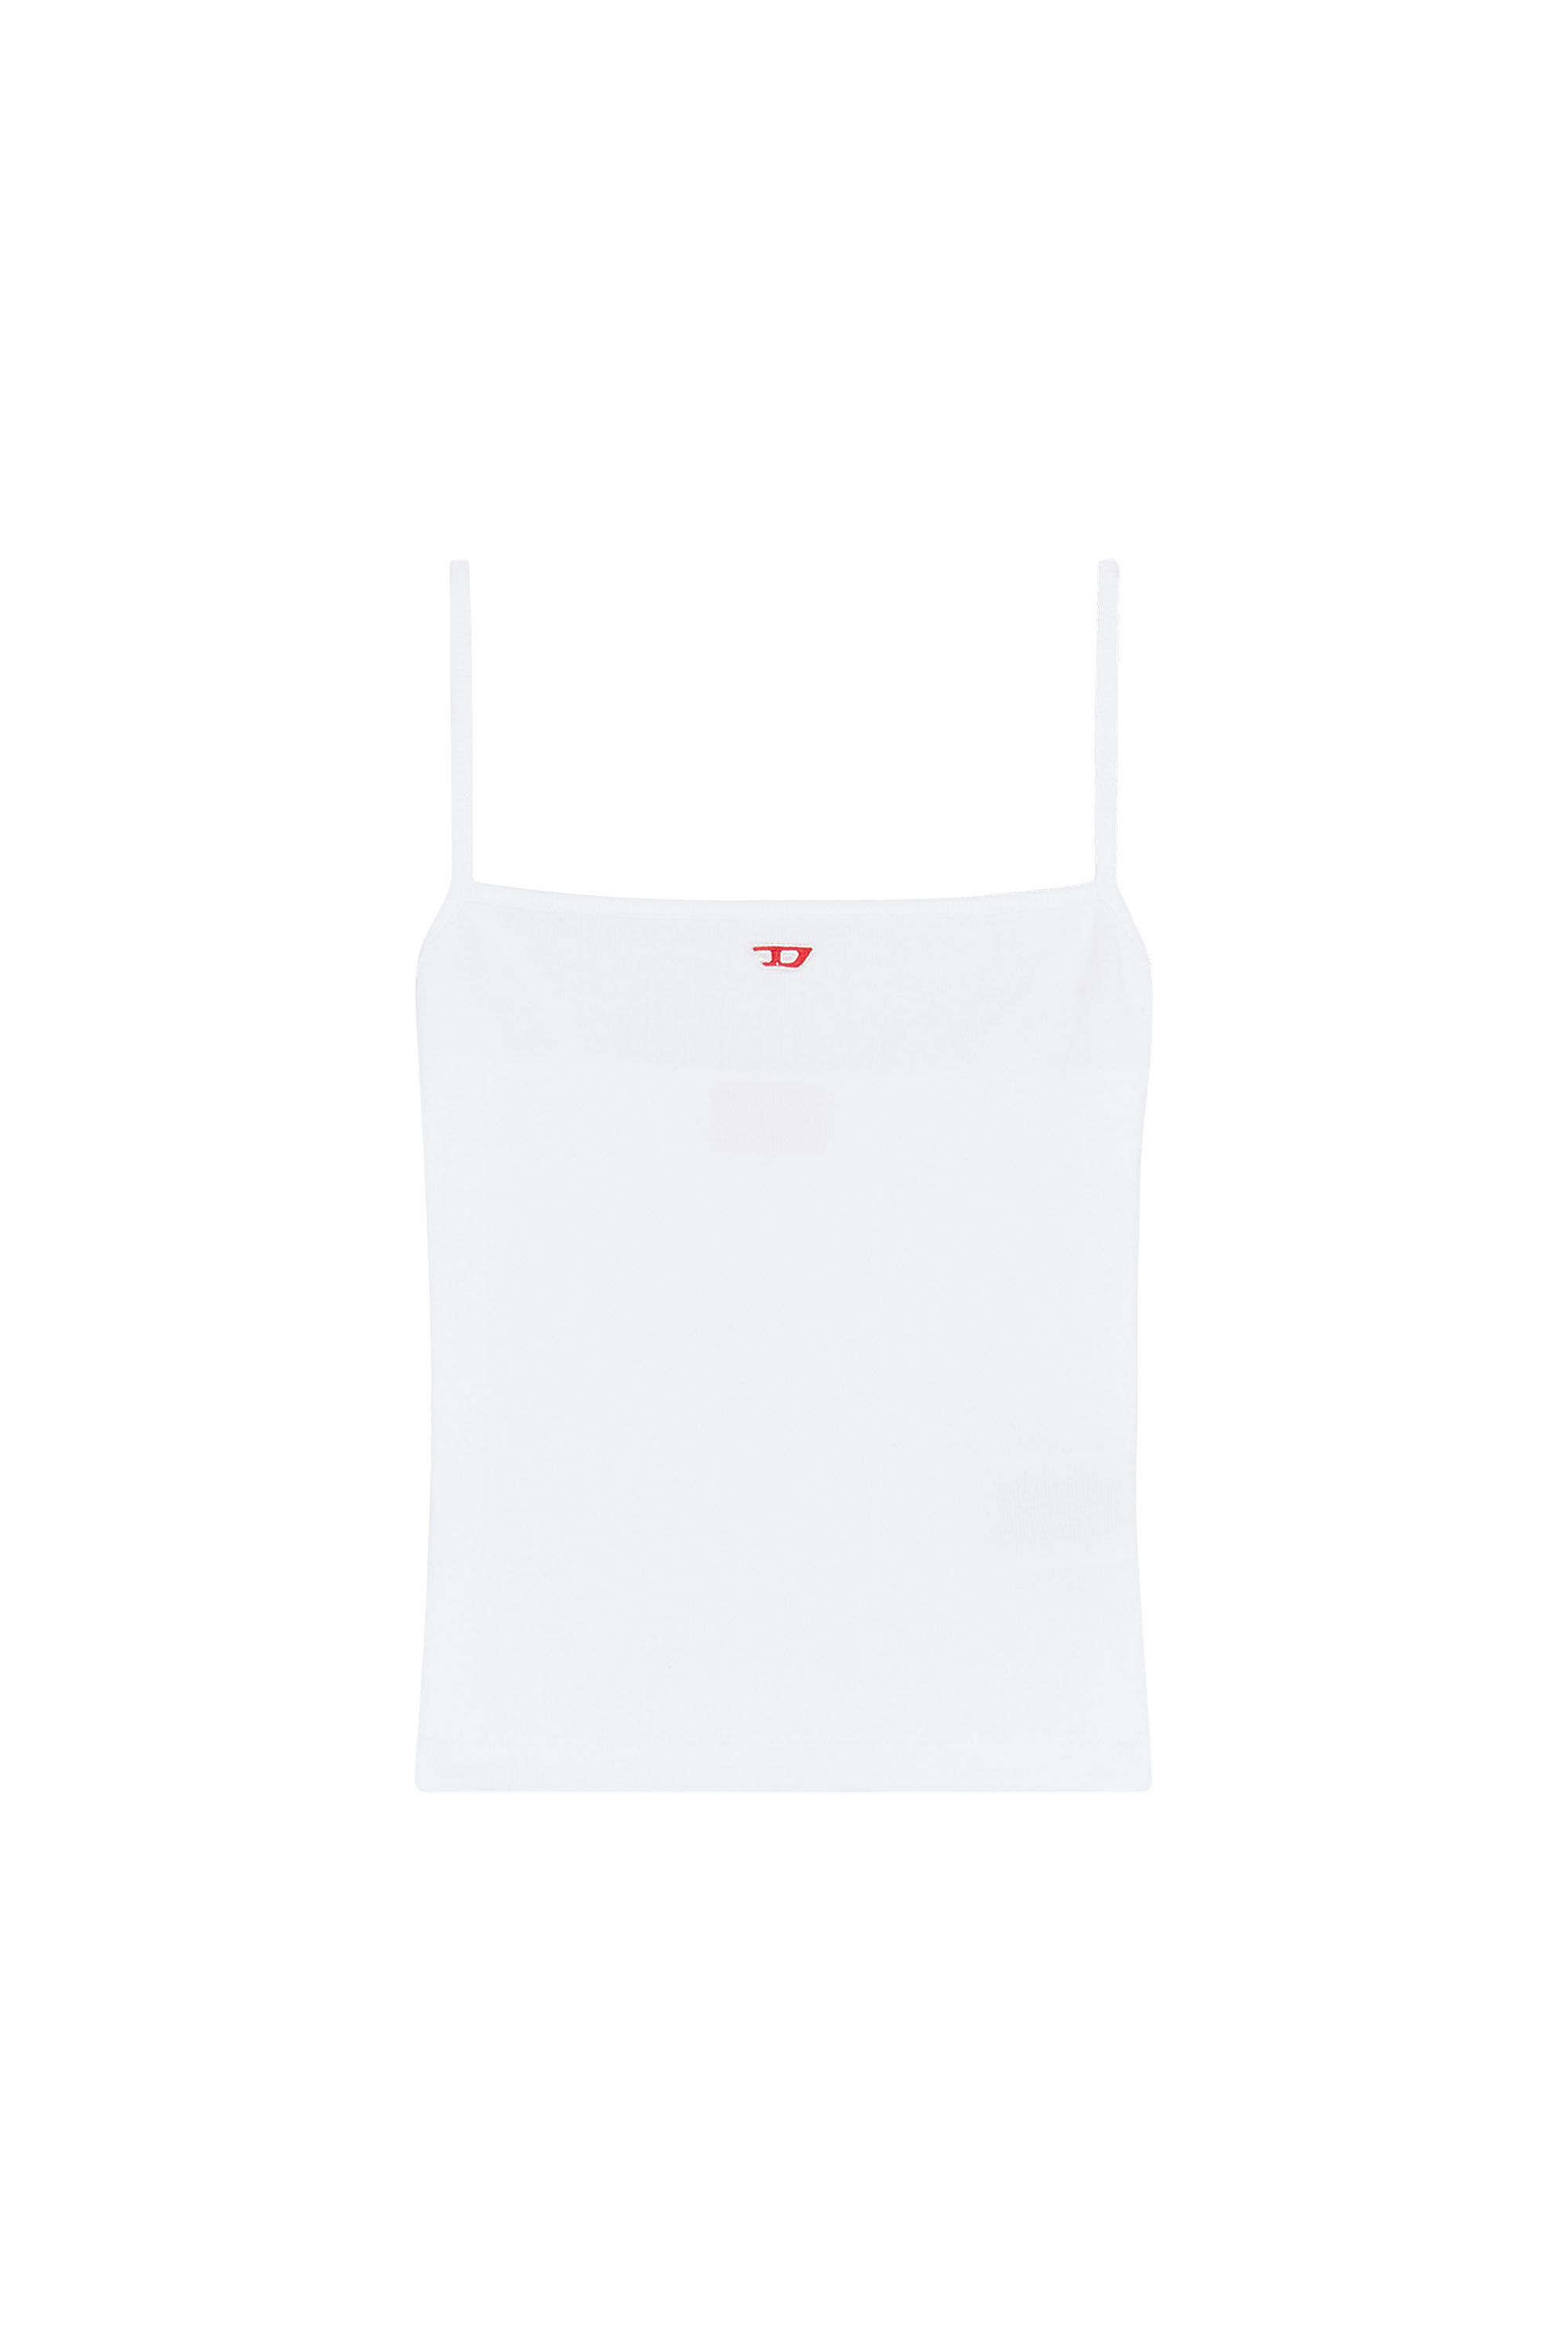 T-HOP-D Woman: Cami top with embroidered D patch | Diesel